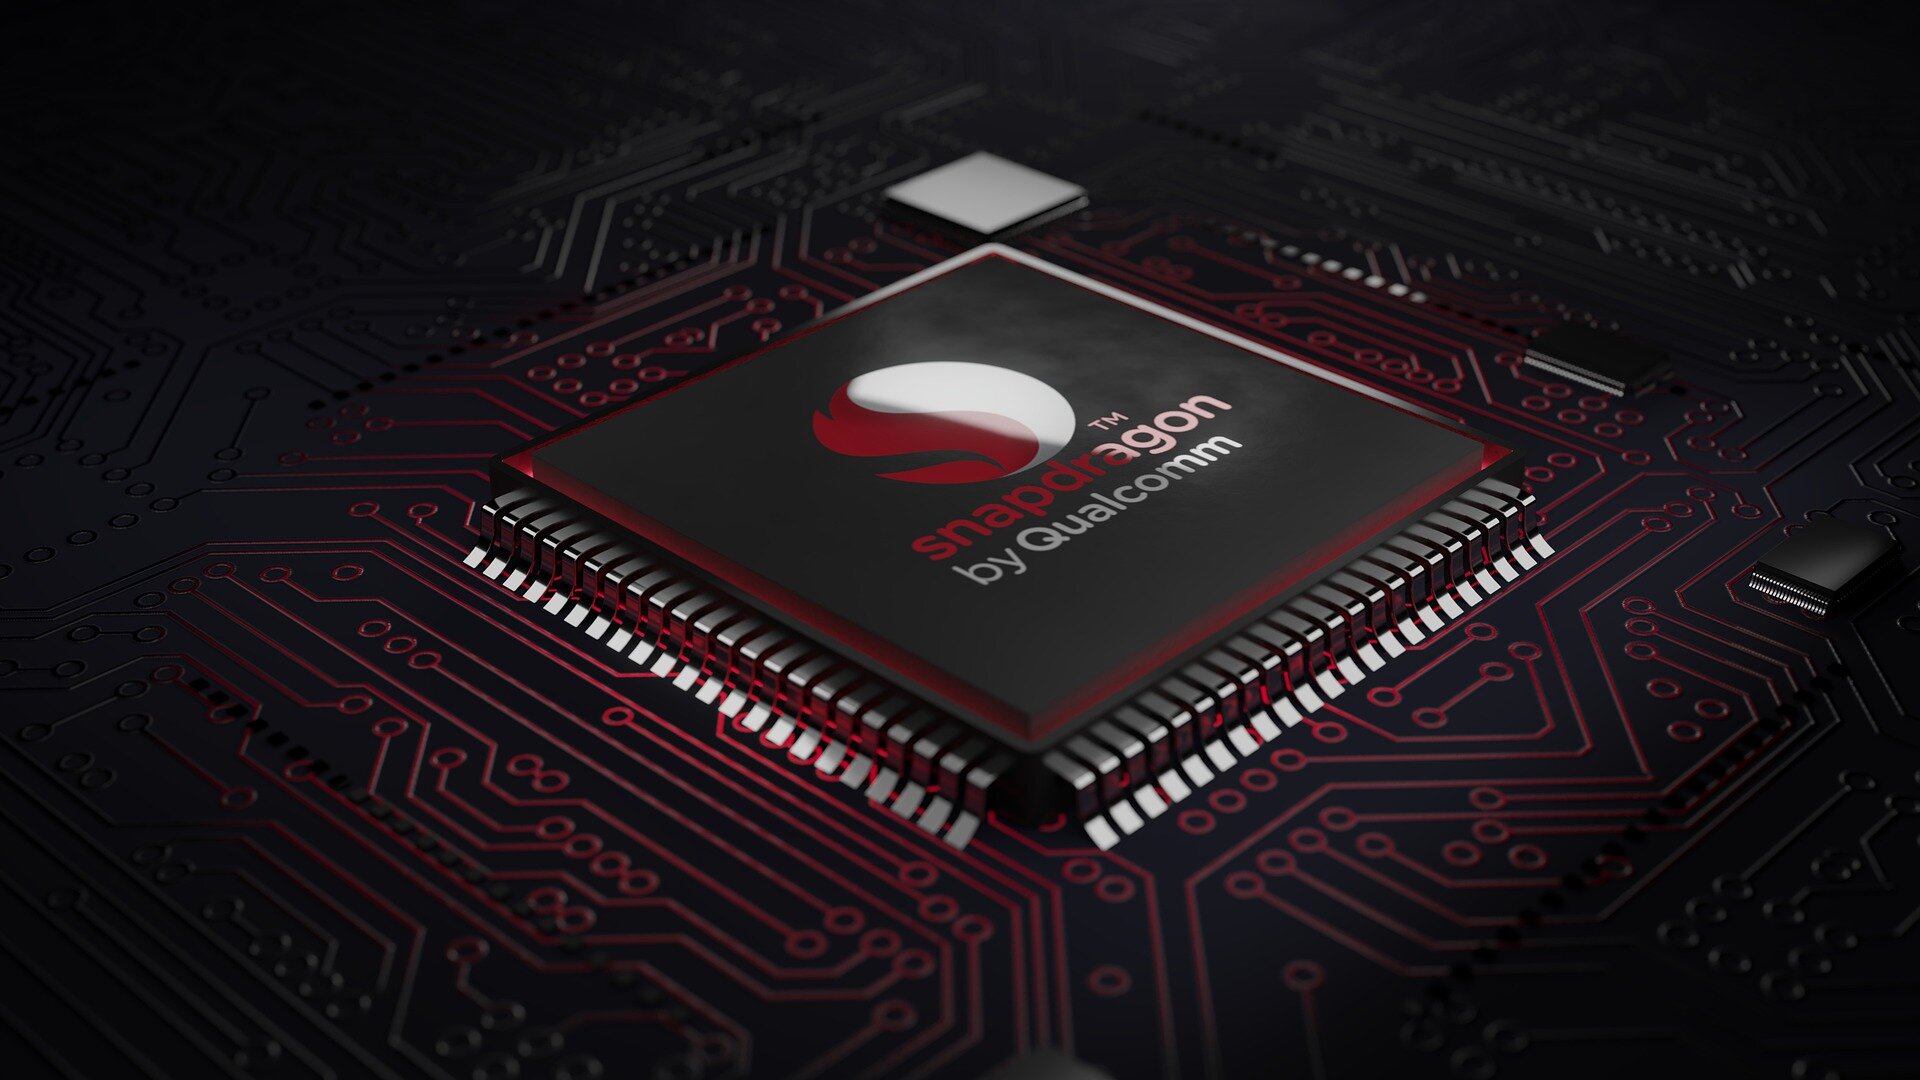 Qualcomm spotlights embedded artificial intelligence in its latest Snapdragon smartphone chip